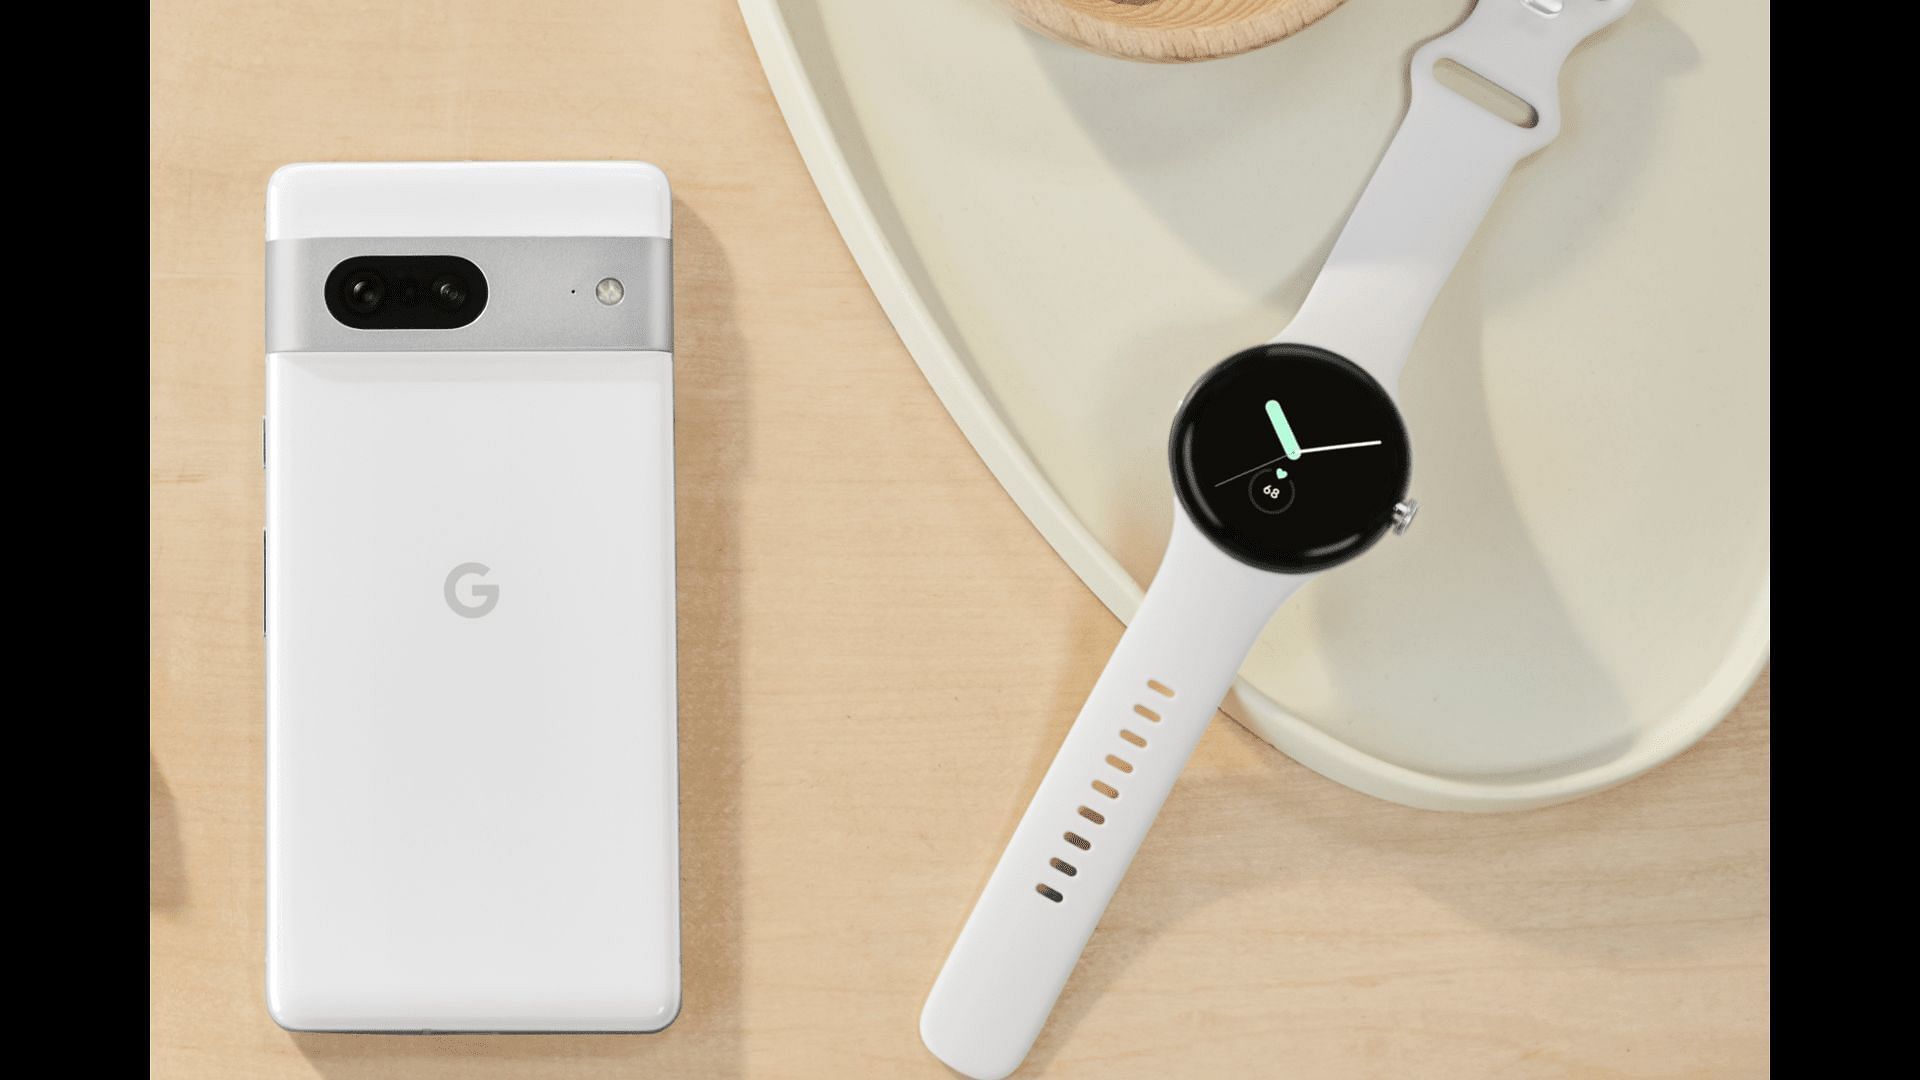 Pixel 7 and Pixel watch in promotional photo (Image via Google)